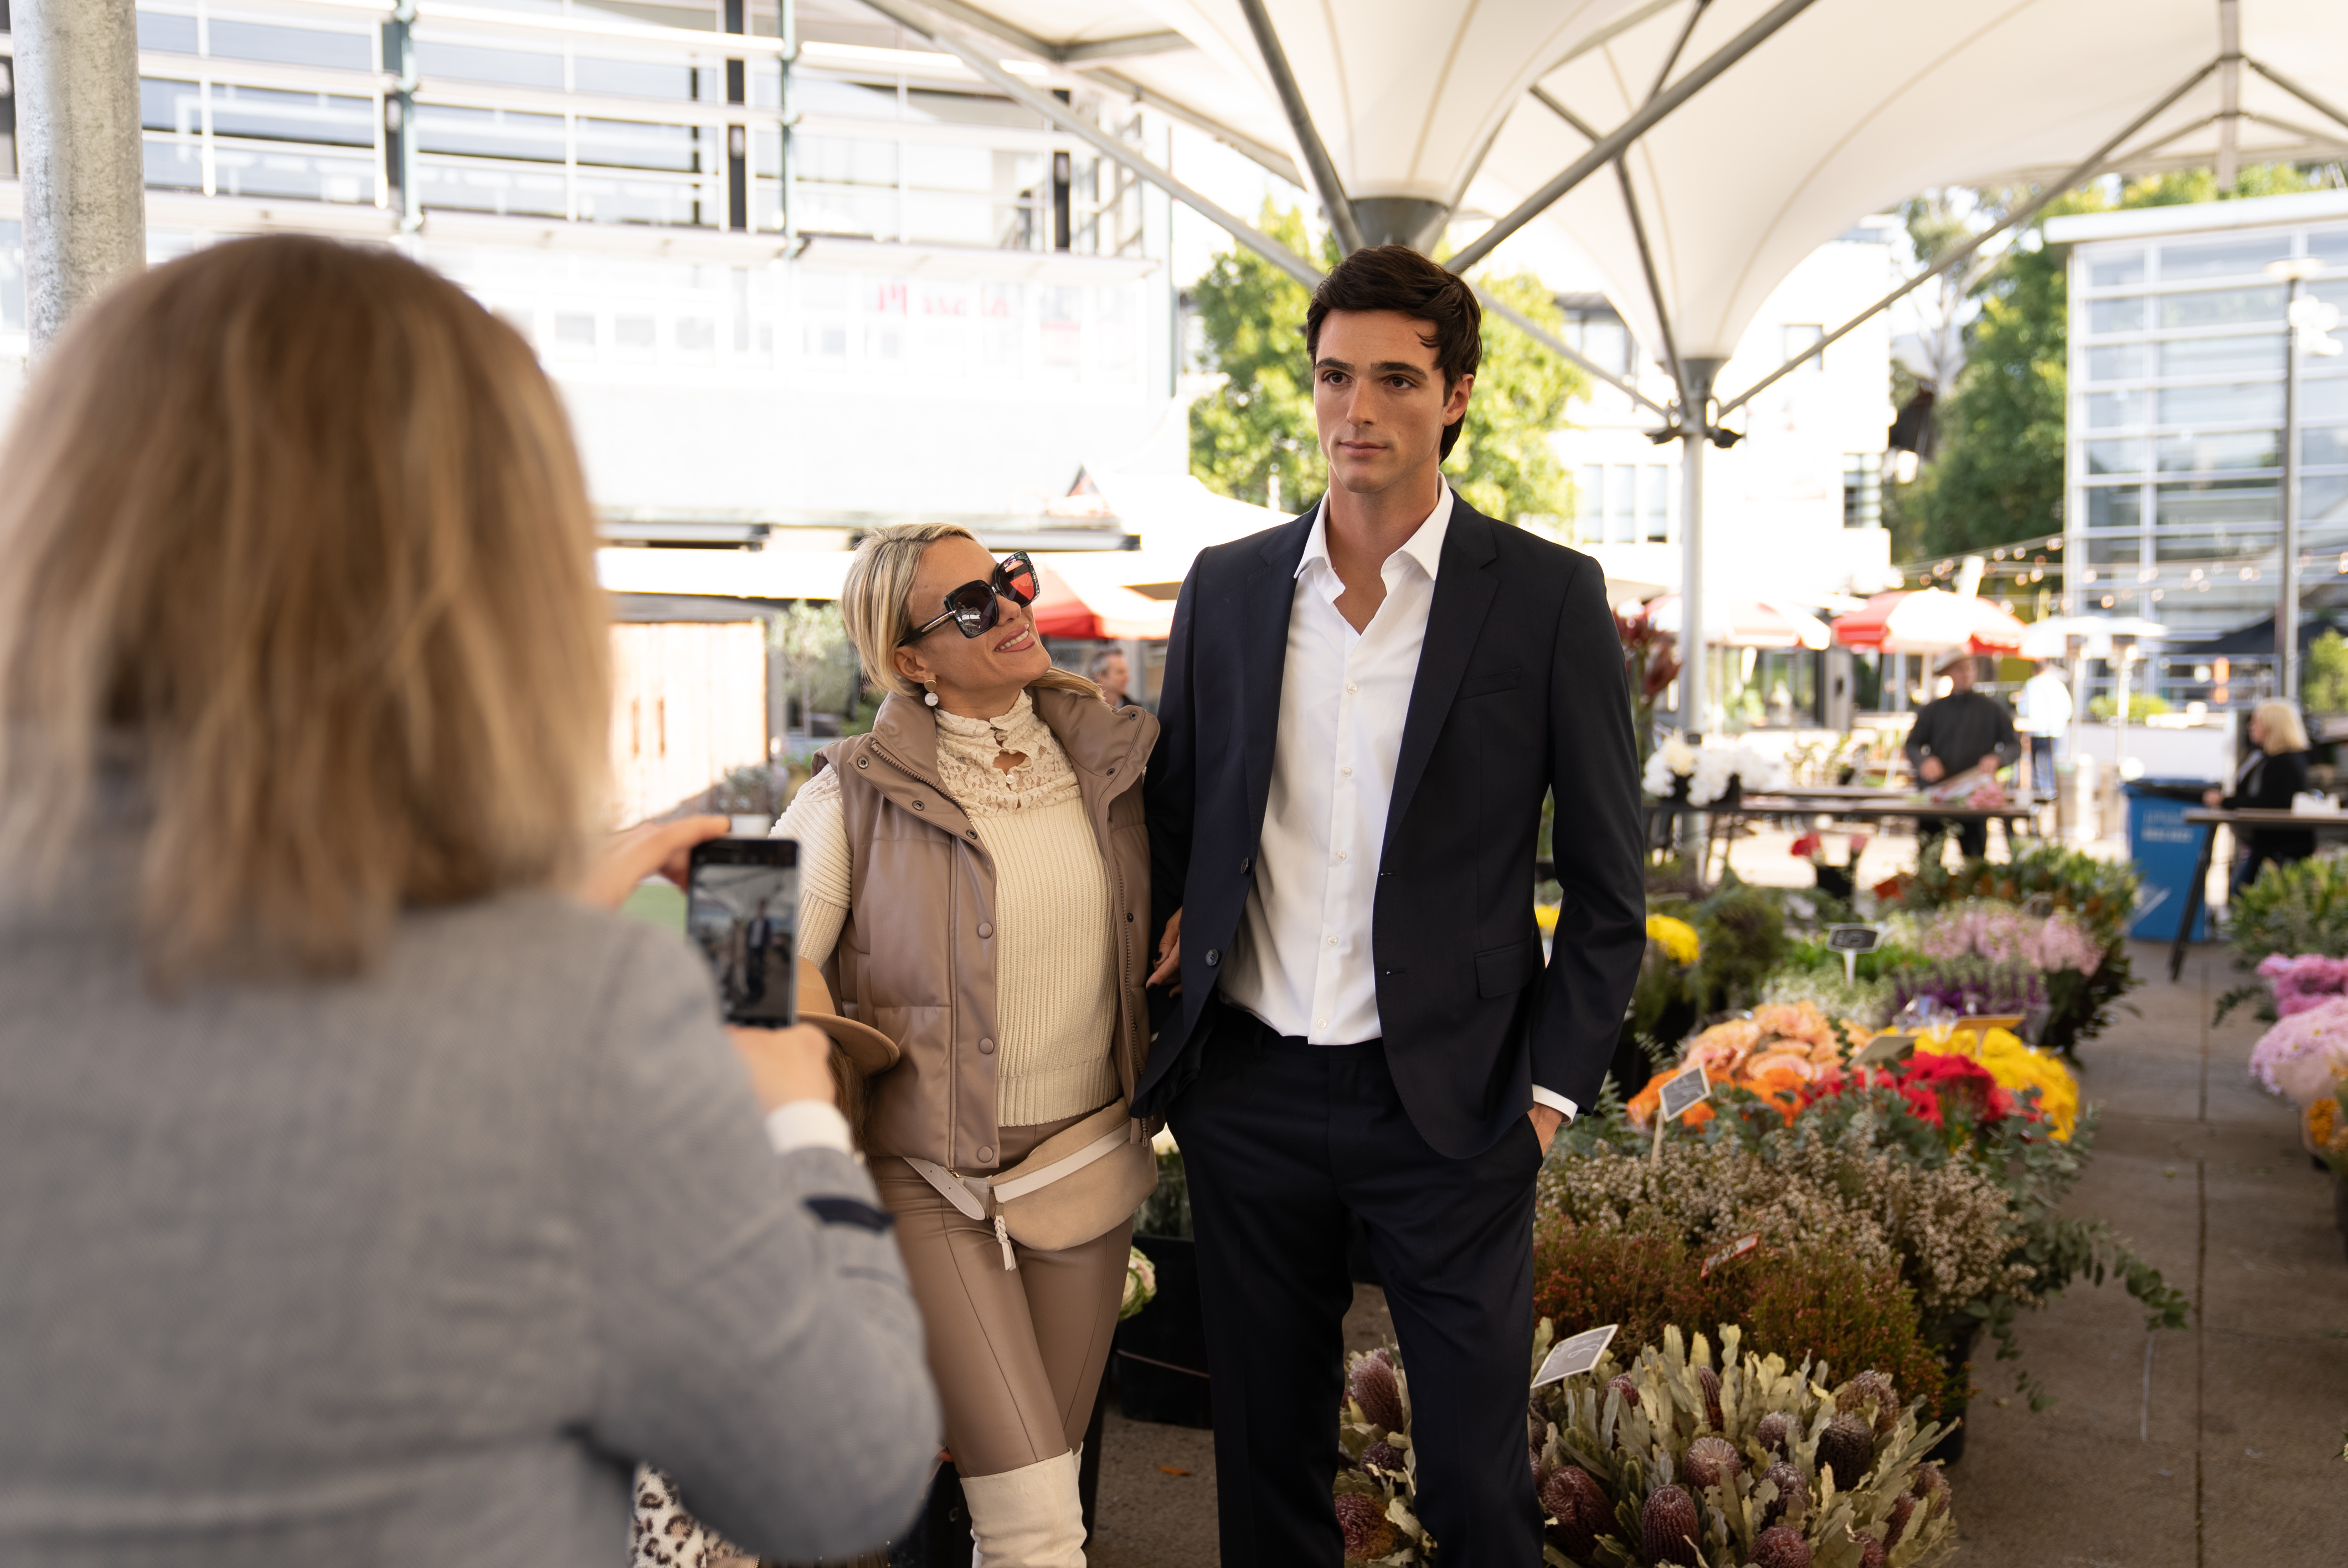 Jacob Elordi At Flower Market With Fans